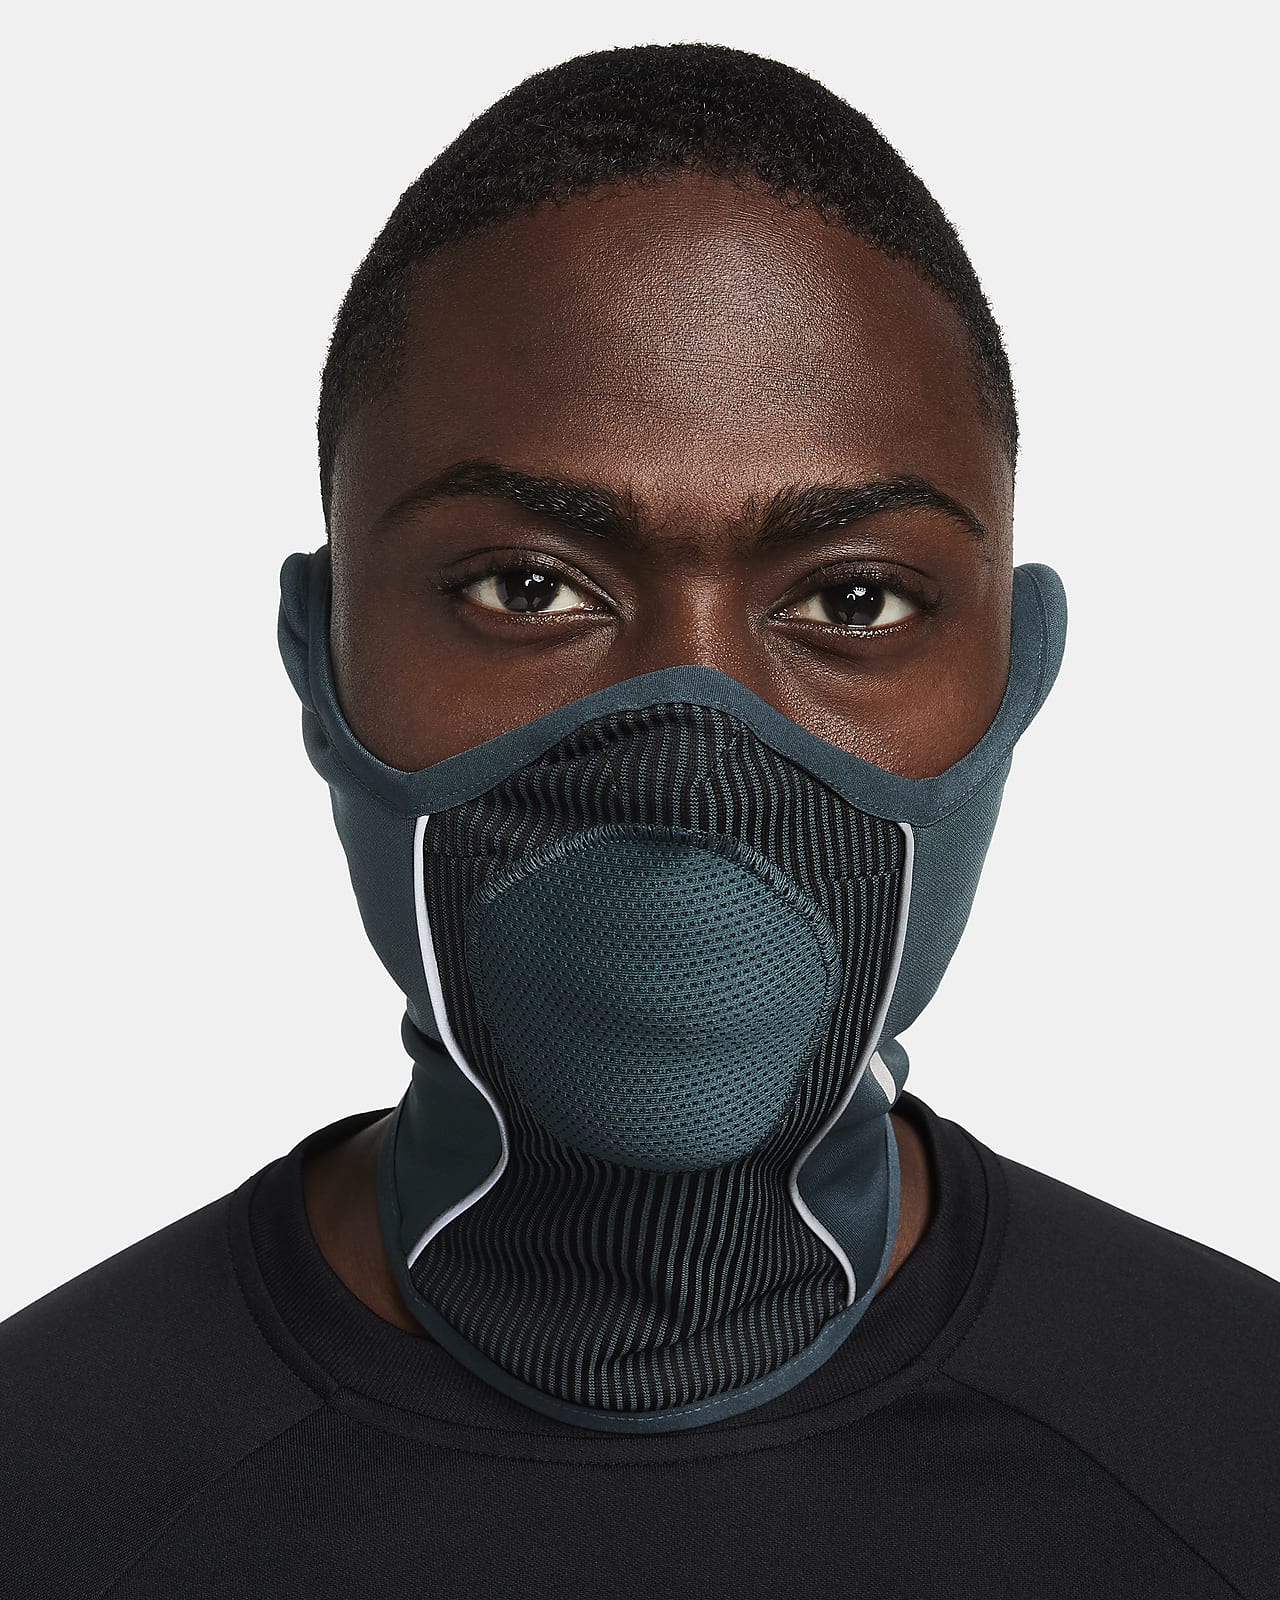 Cache-cou Nike Snood - Taille L / XL